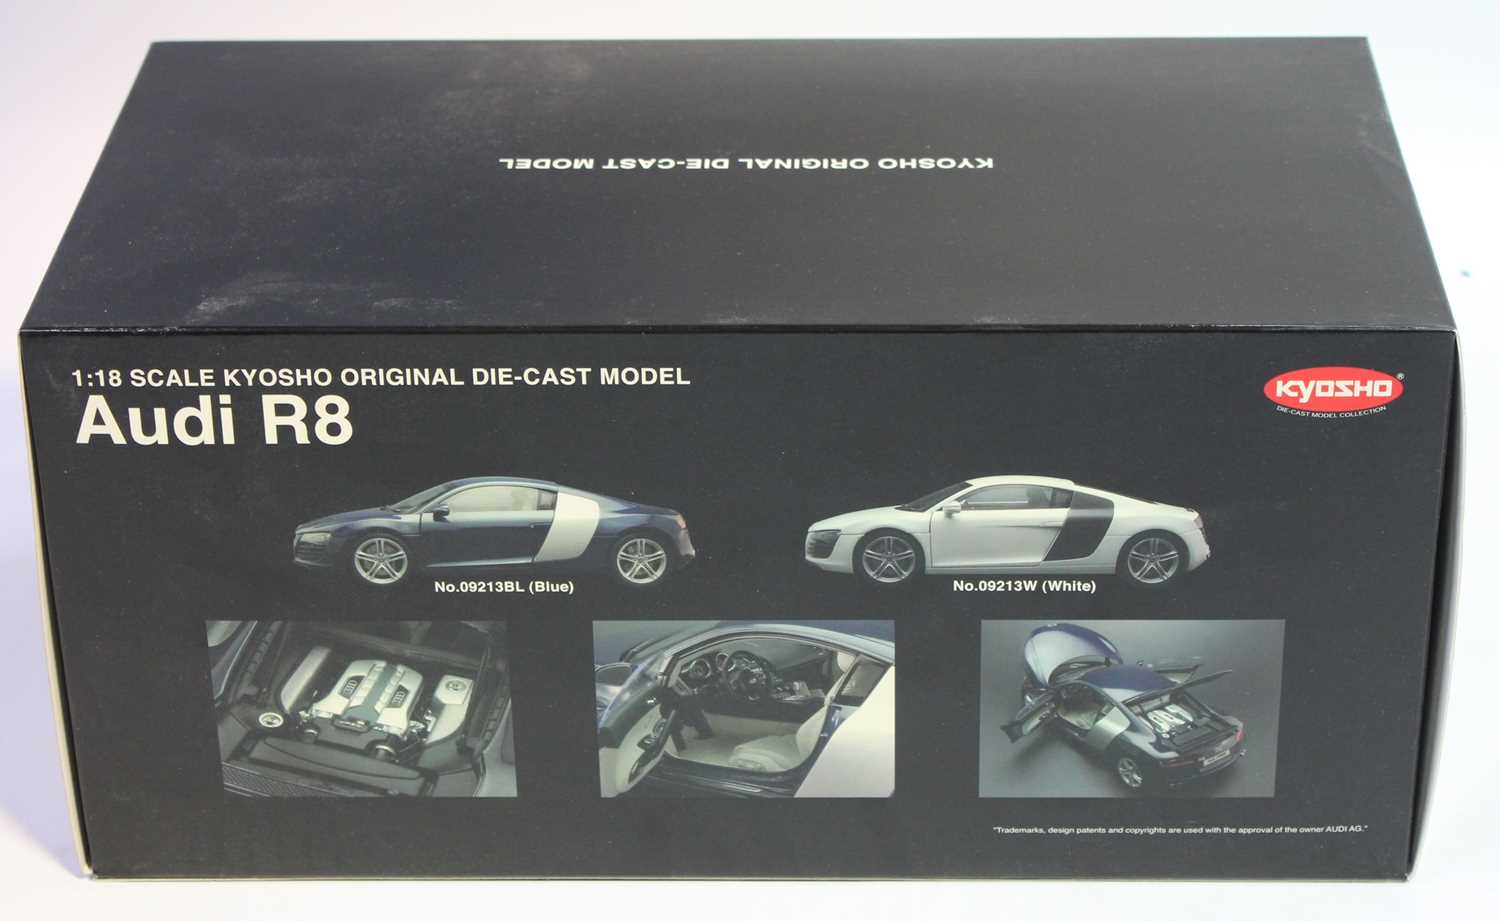 Kyosho No.09213W 1/18th scale boxed model of a Audi R8, finished in blue, as issued in the